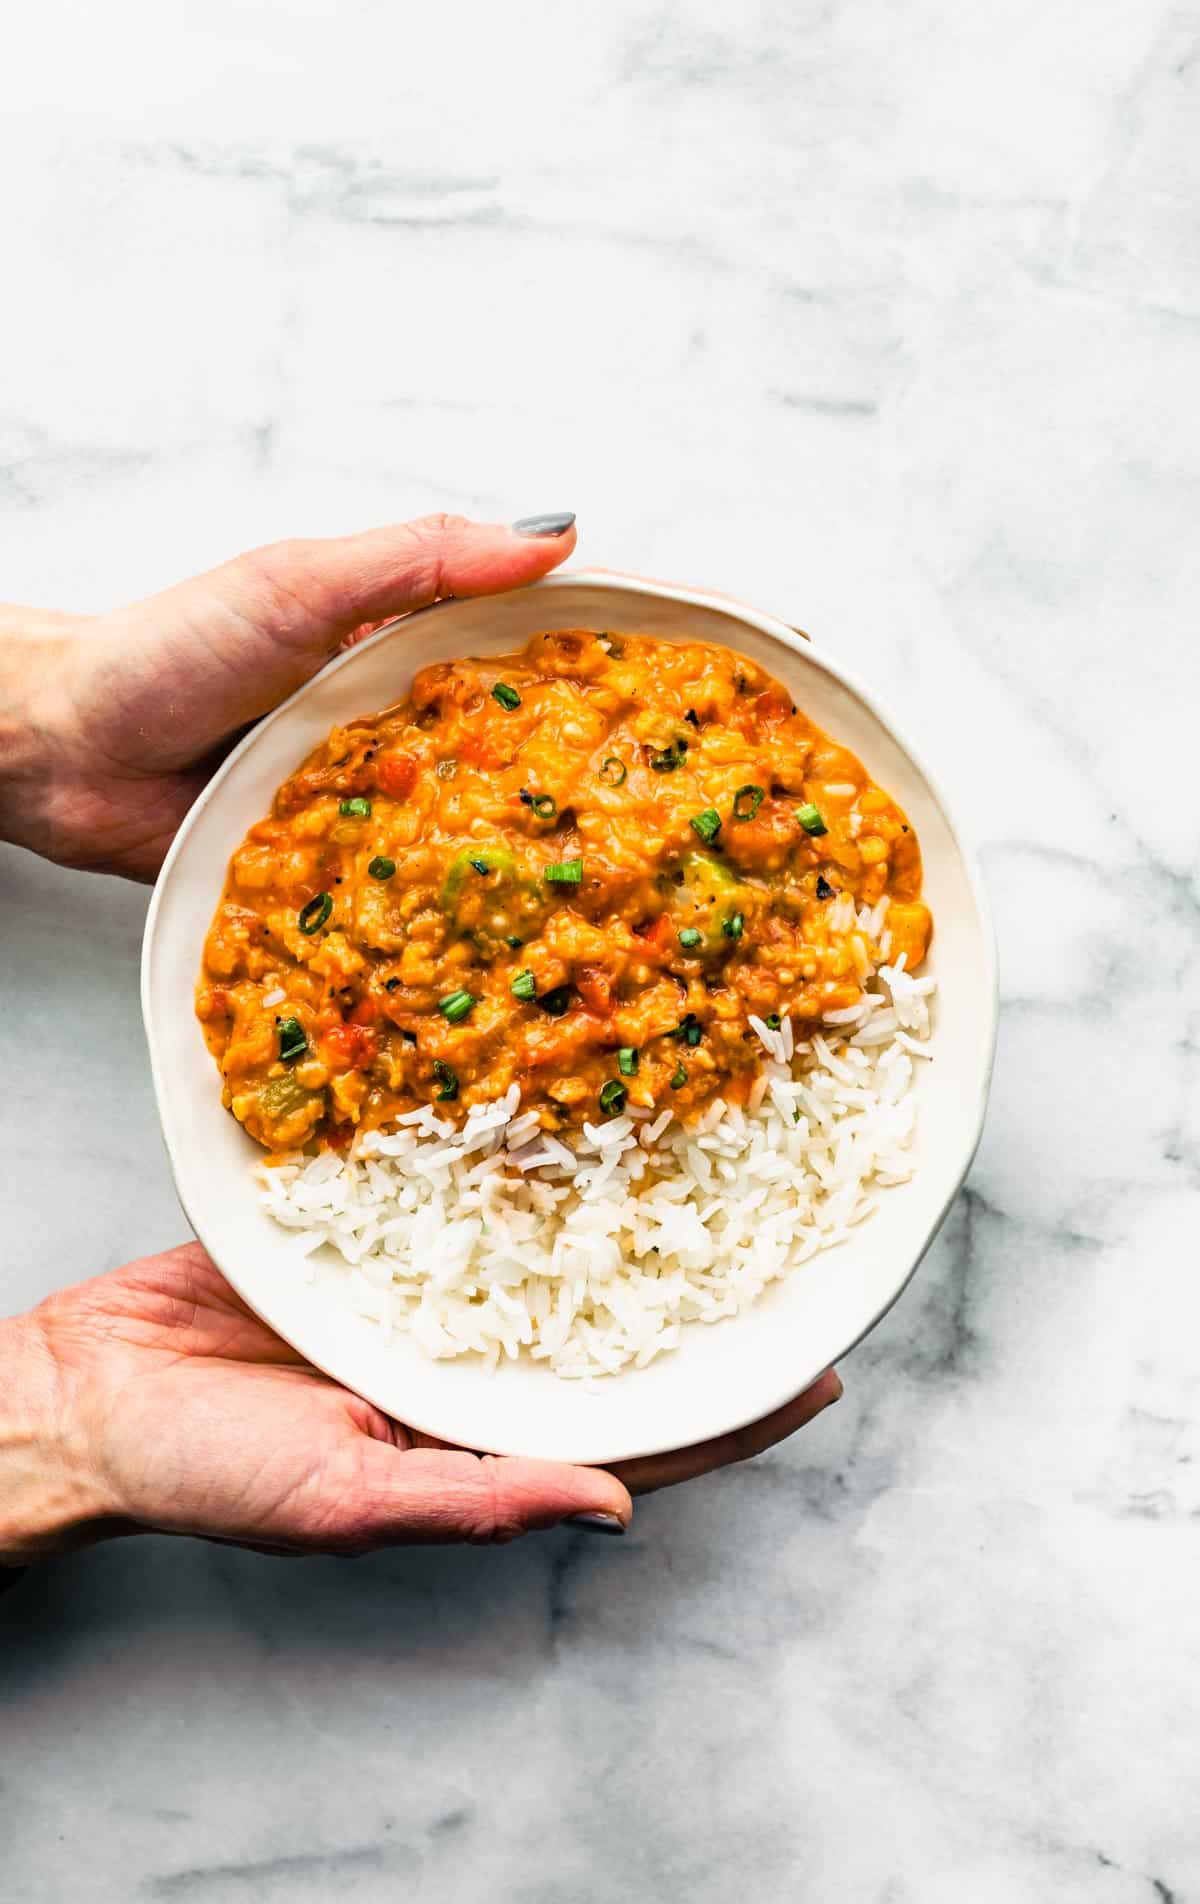 Hands holding a bowl of Instant Pot Gumbo over rice.